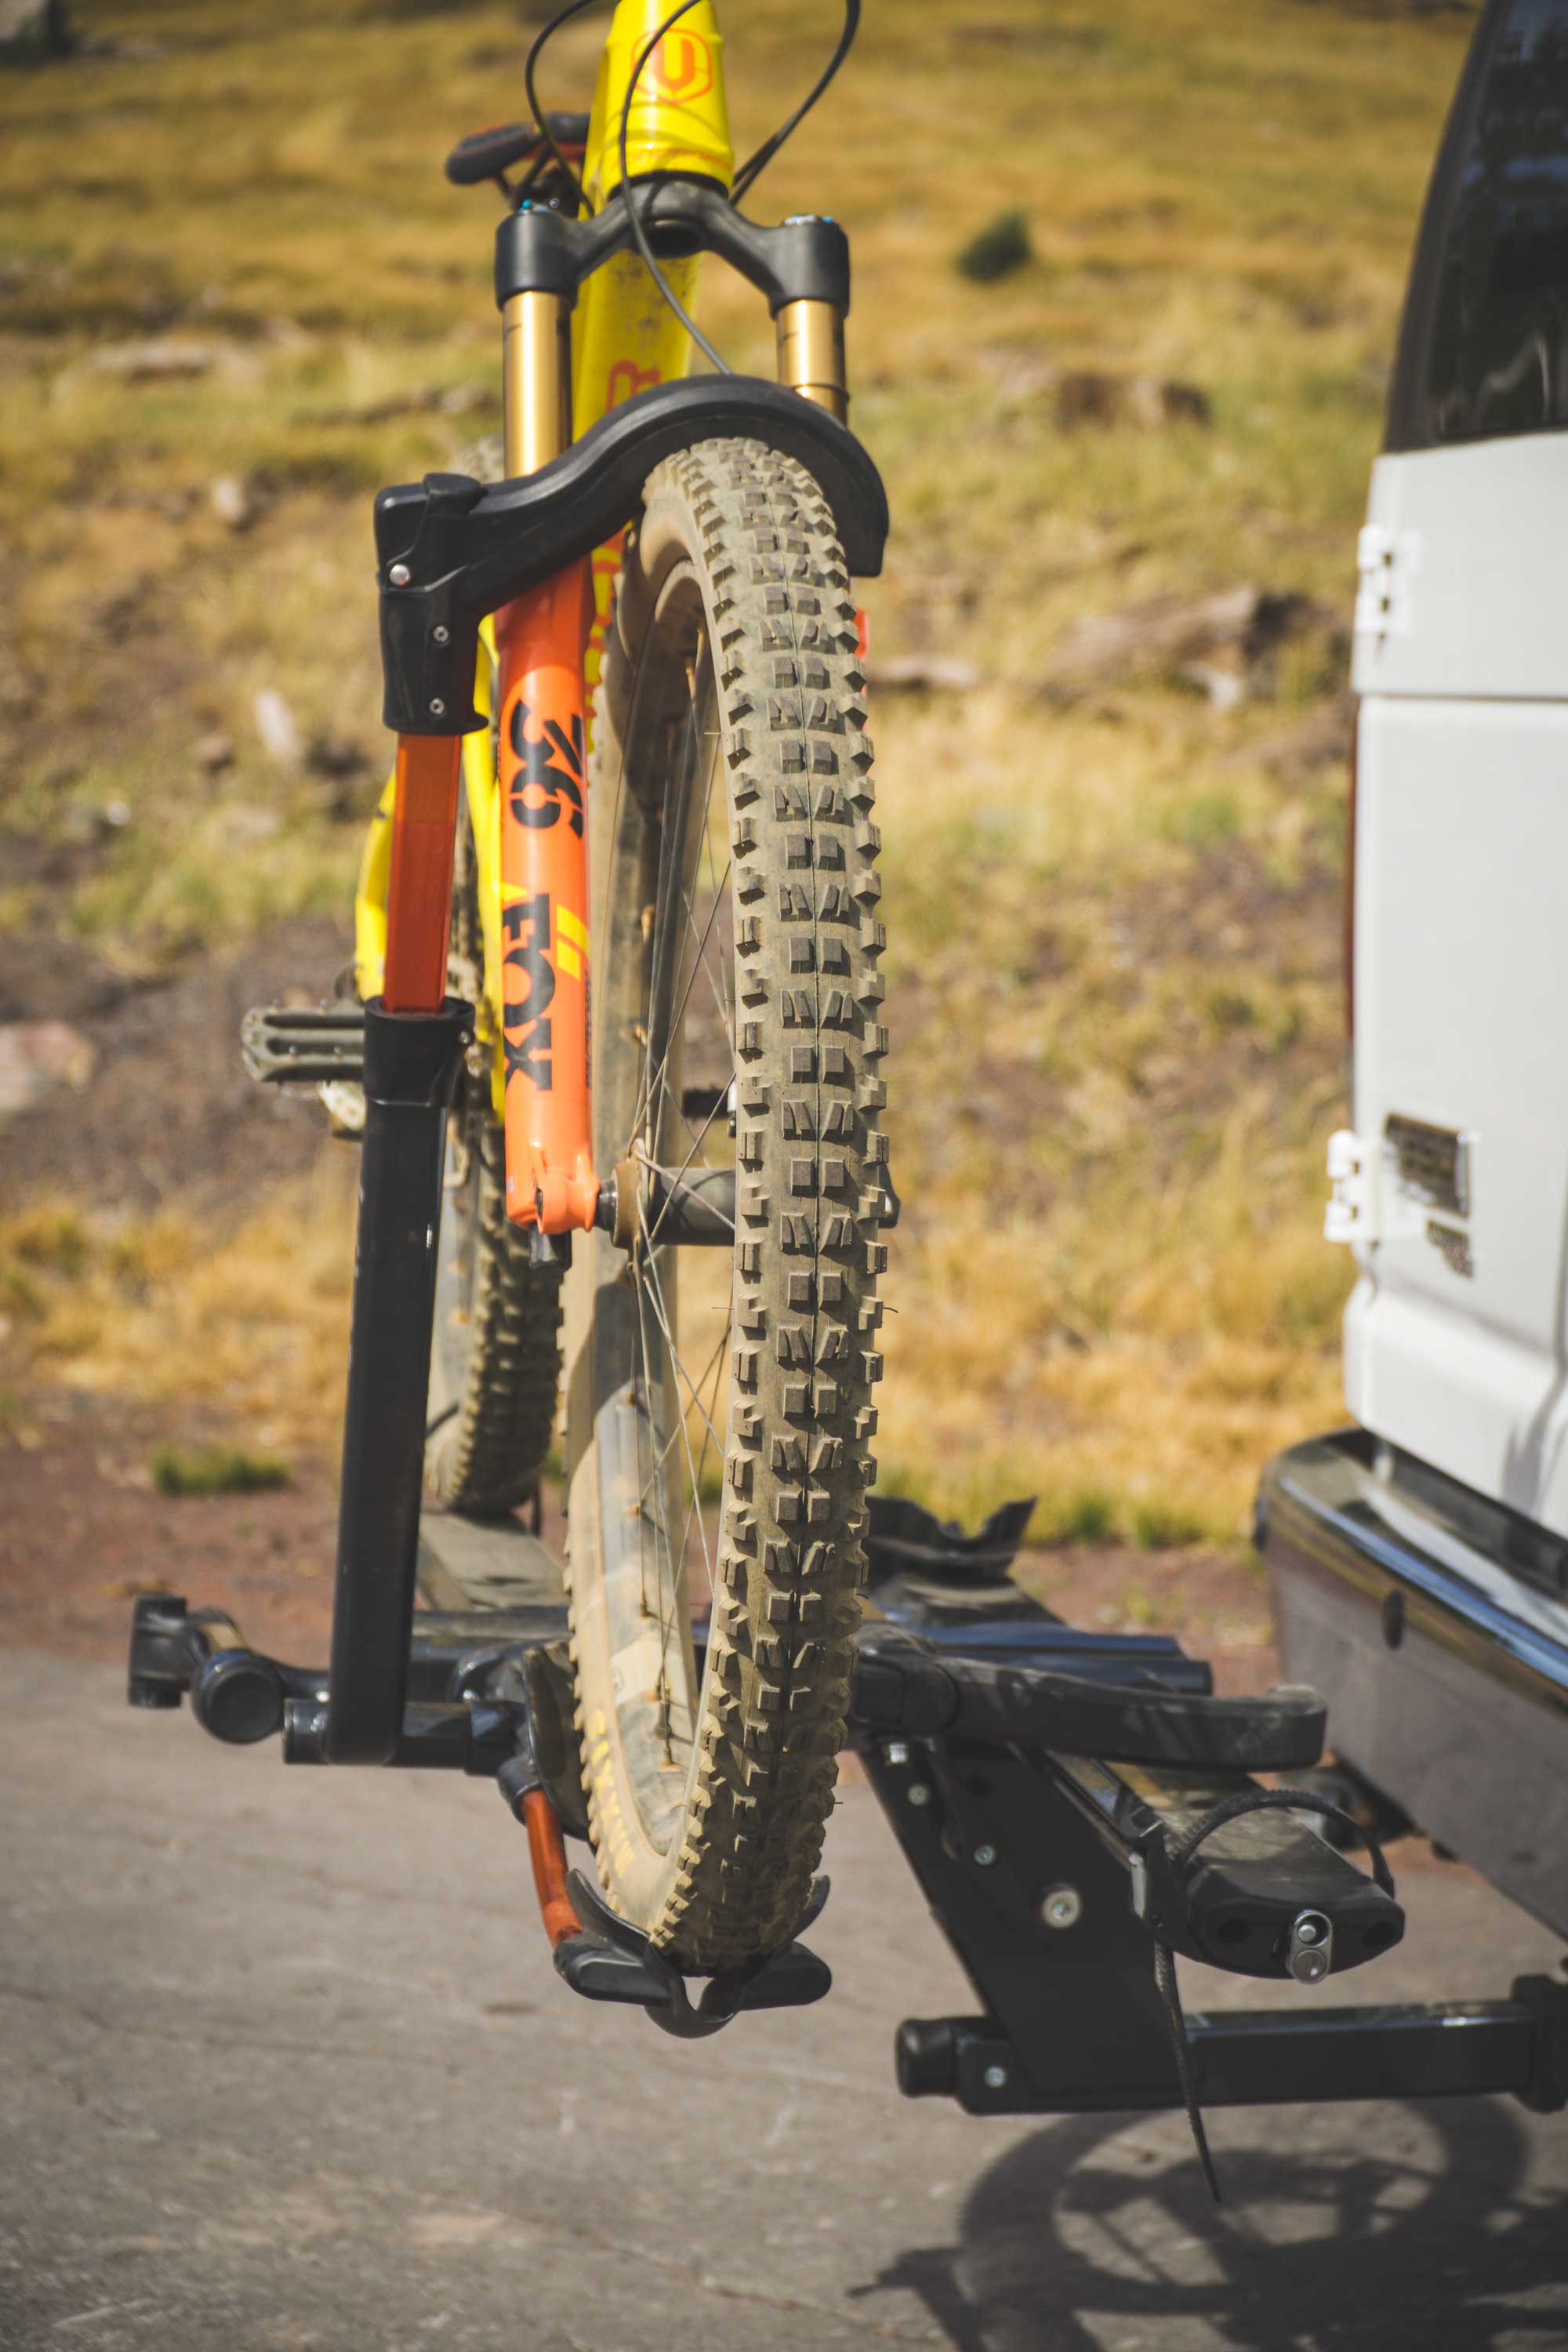 Kuatt NV 2.0 Bike Rack Review - One of the nicest hitch mountined racks